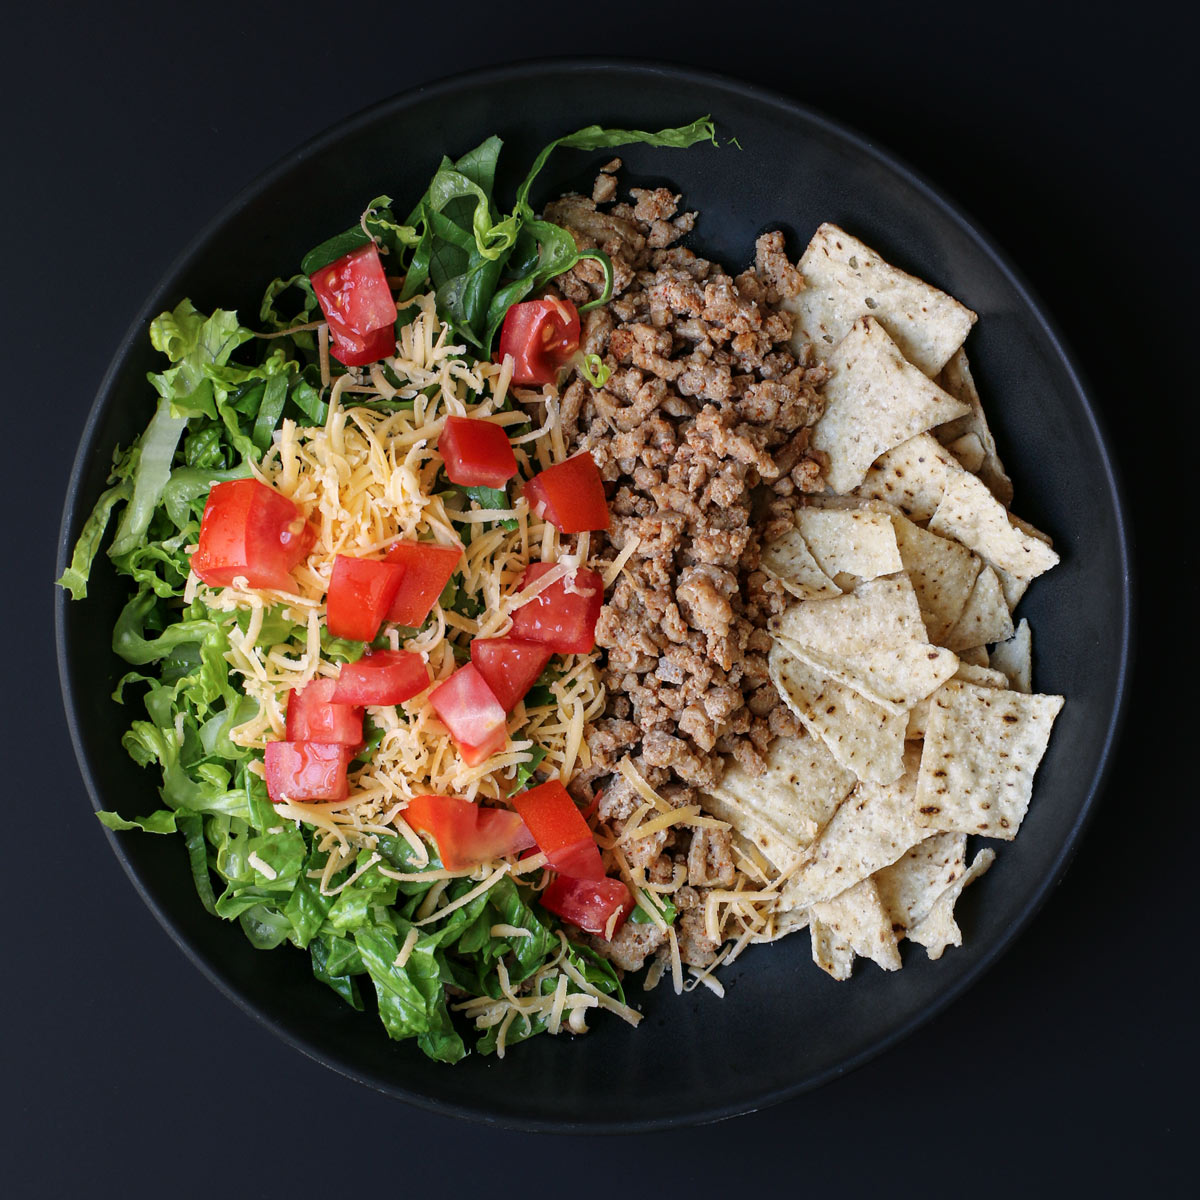 salad assembled in black bowl with chips, turkey meat, lettuce, cheese, and tomatoes.